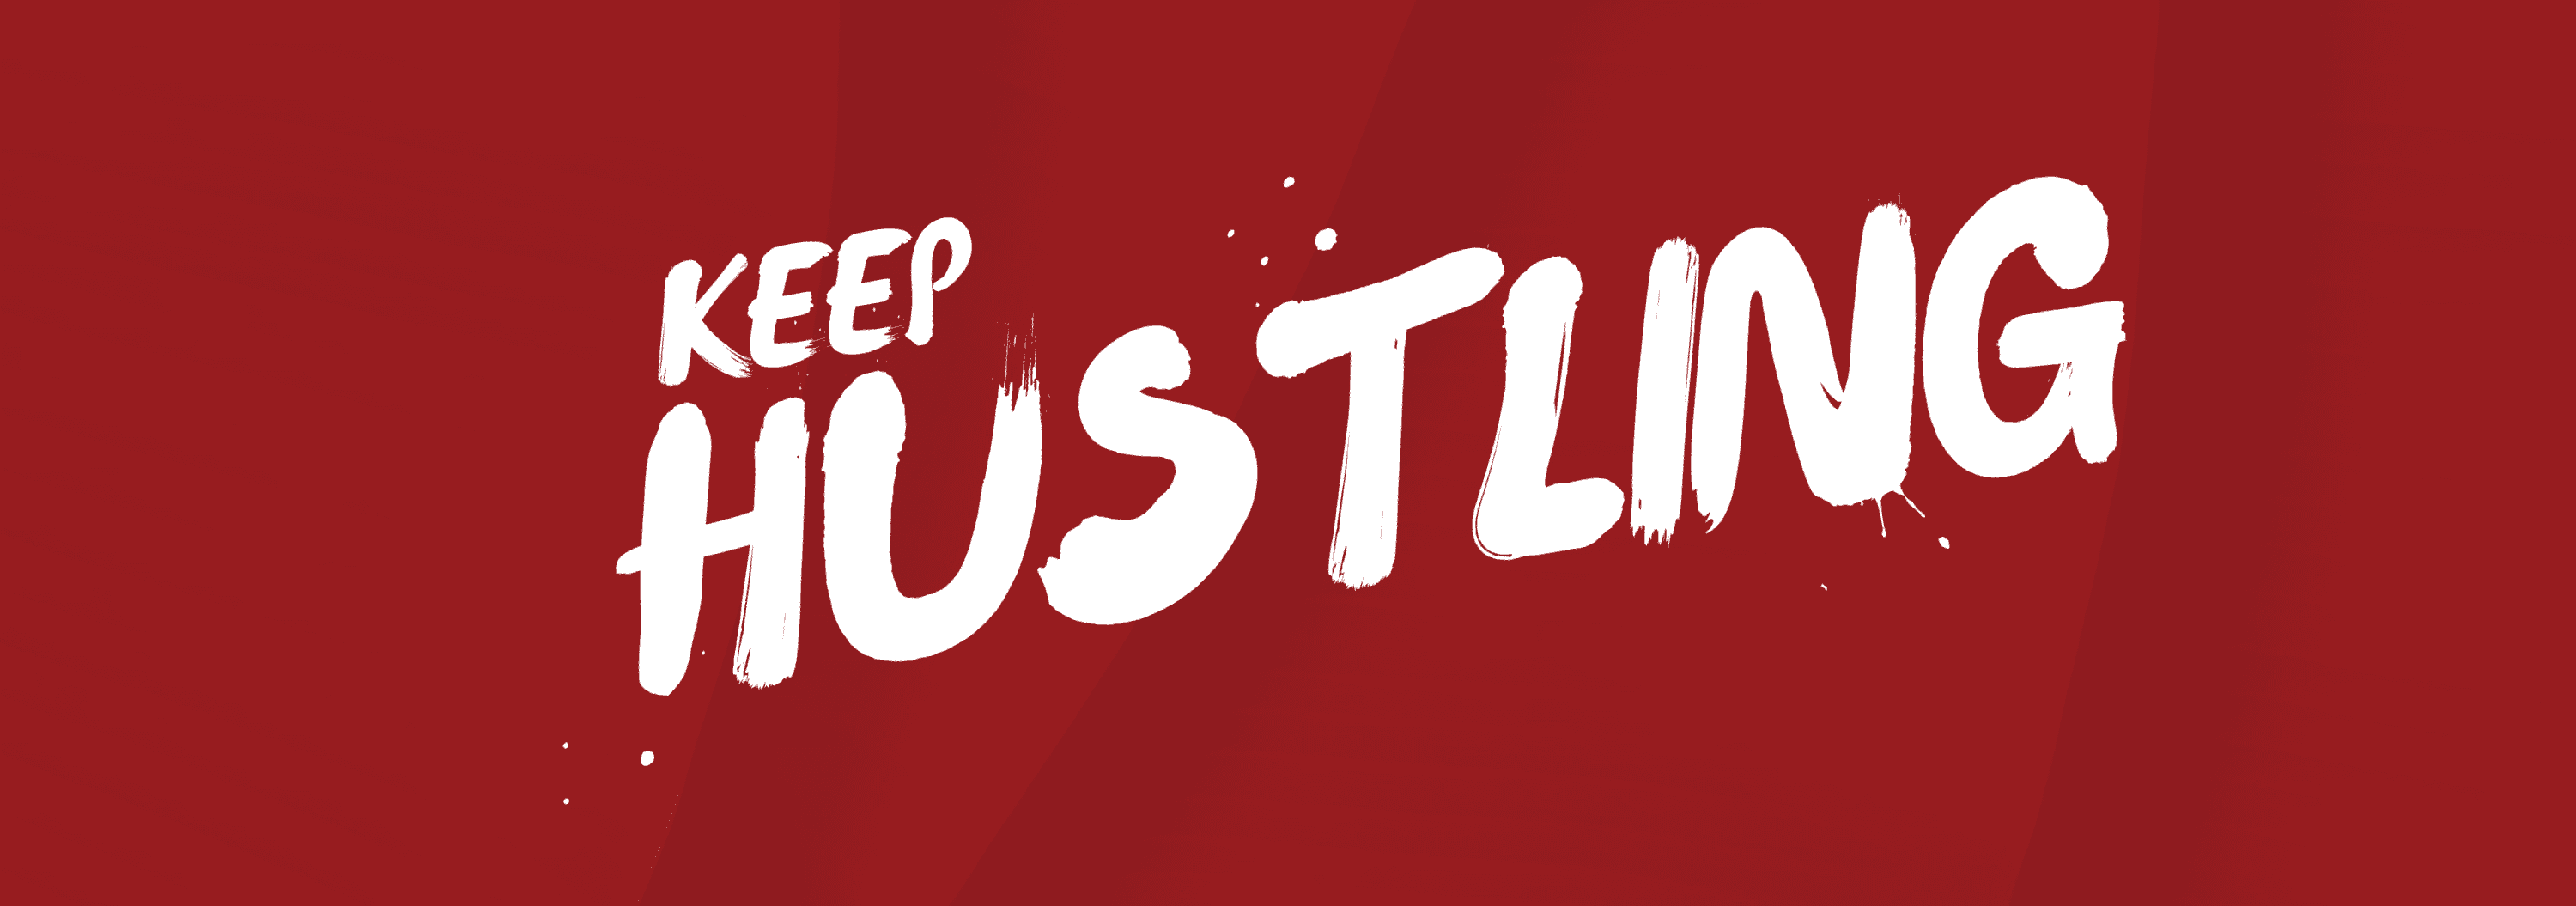 red-background-keep-hustling-tumblr-banner-template-thumbnail-img